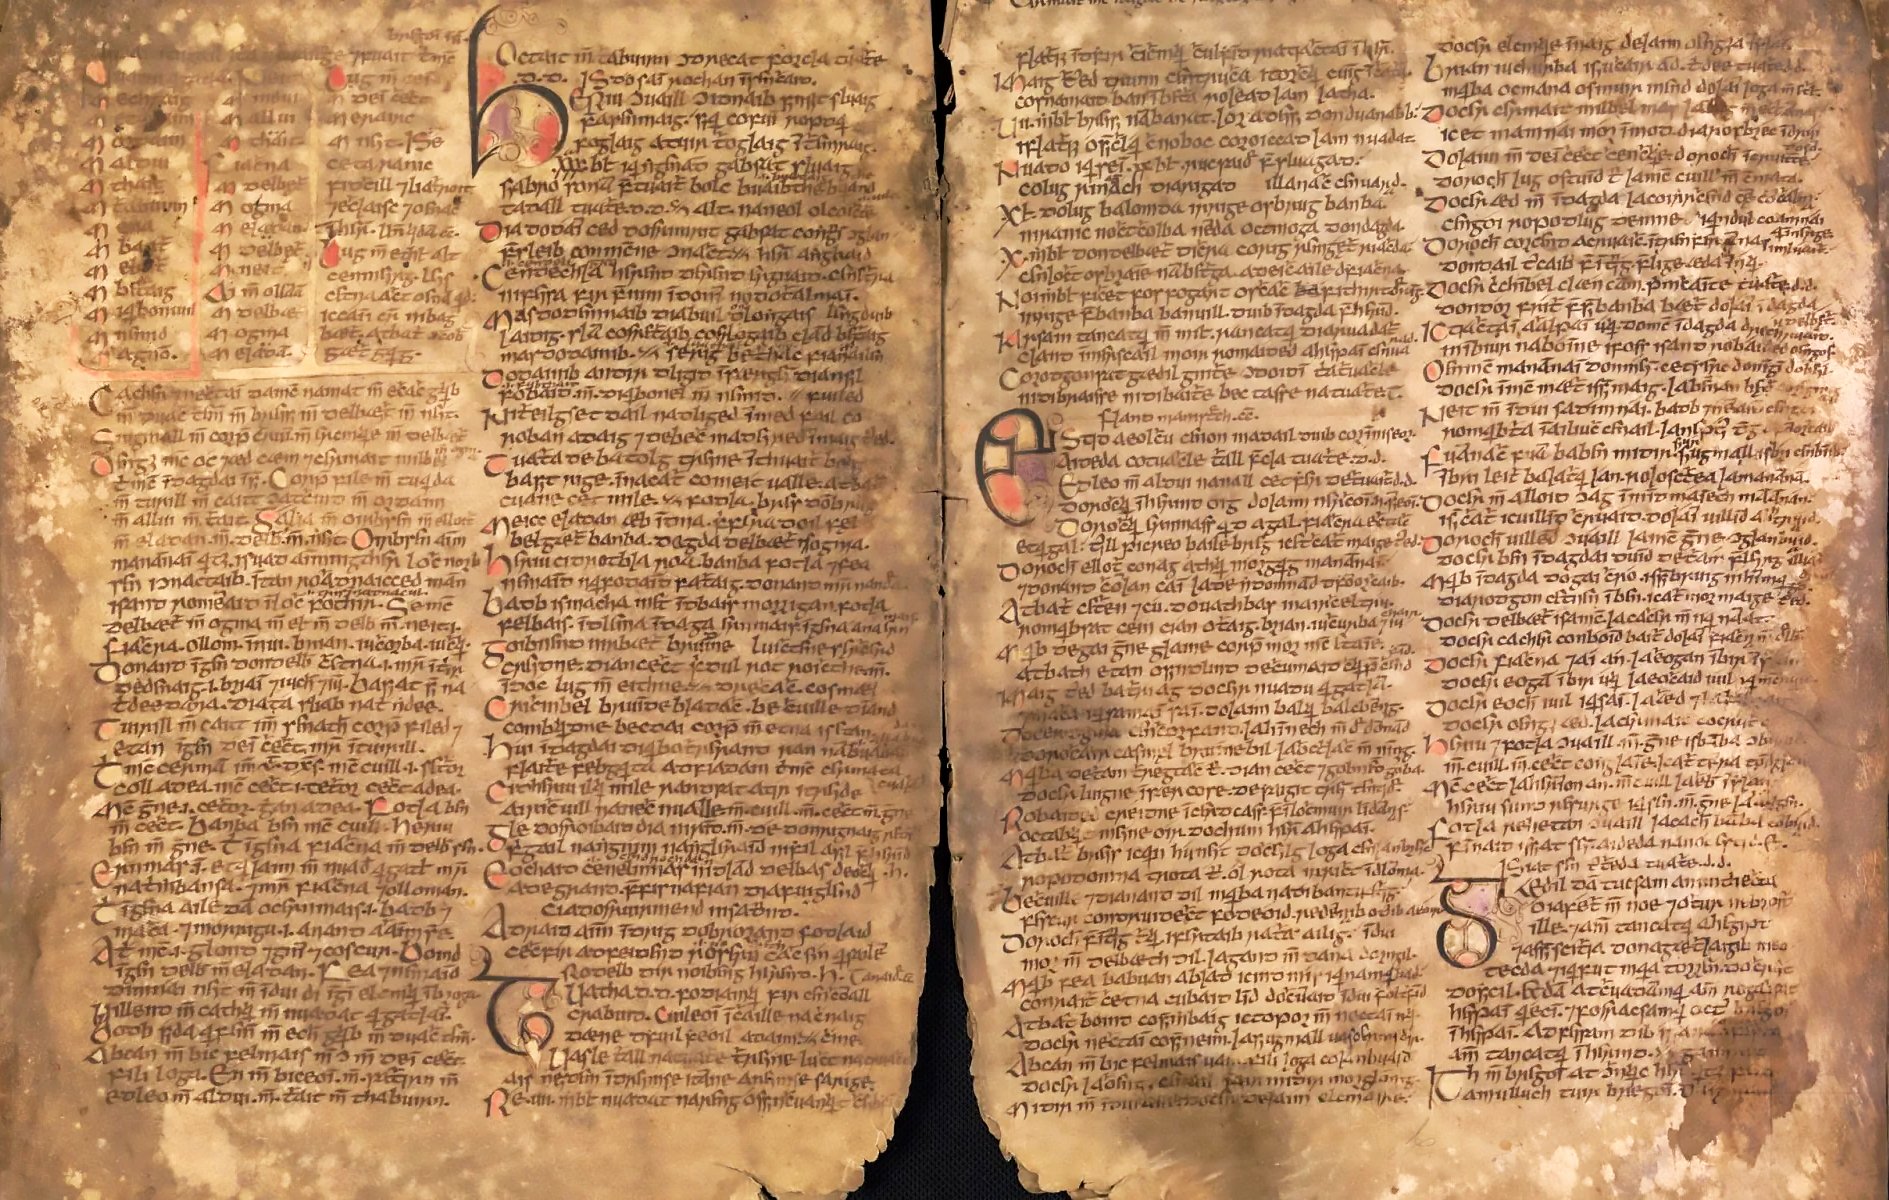 Image of pages from the 12th-century Book of Leinster, held at The Library of Trinity College Dublin, displaying the text of 'The Intoxication of the Ulstermen', a narrative from the Ulster Cycle, with intricate medieval script and embellishments.